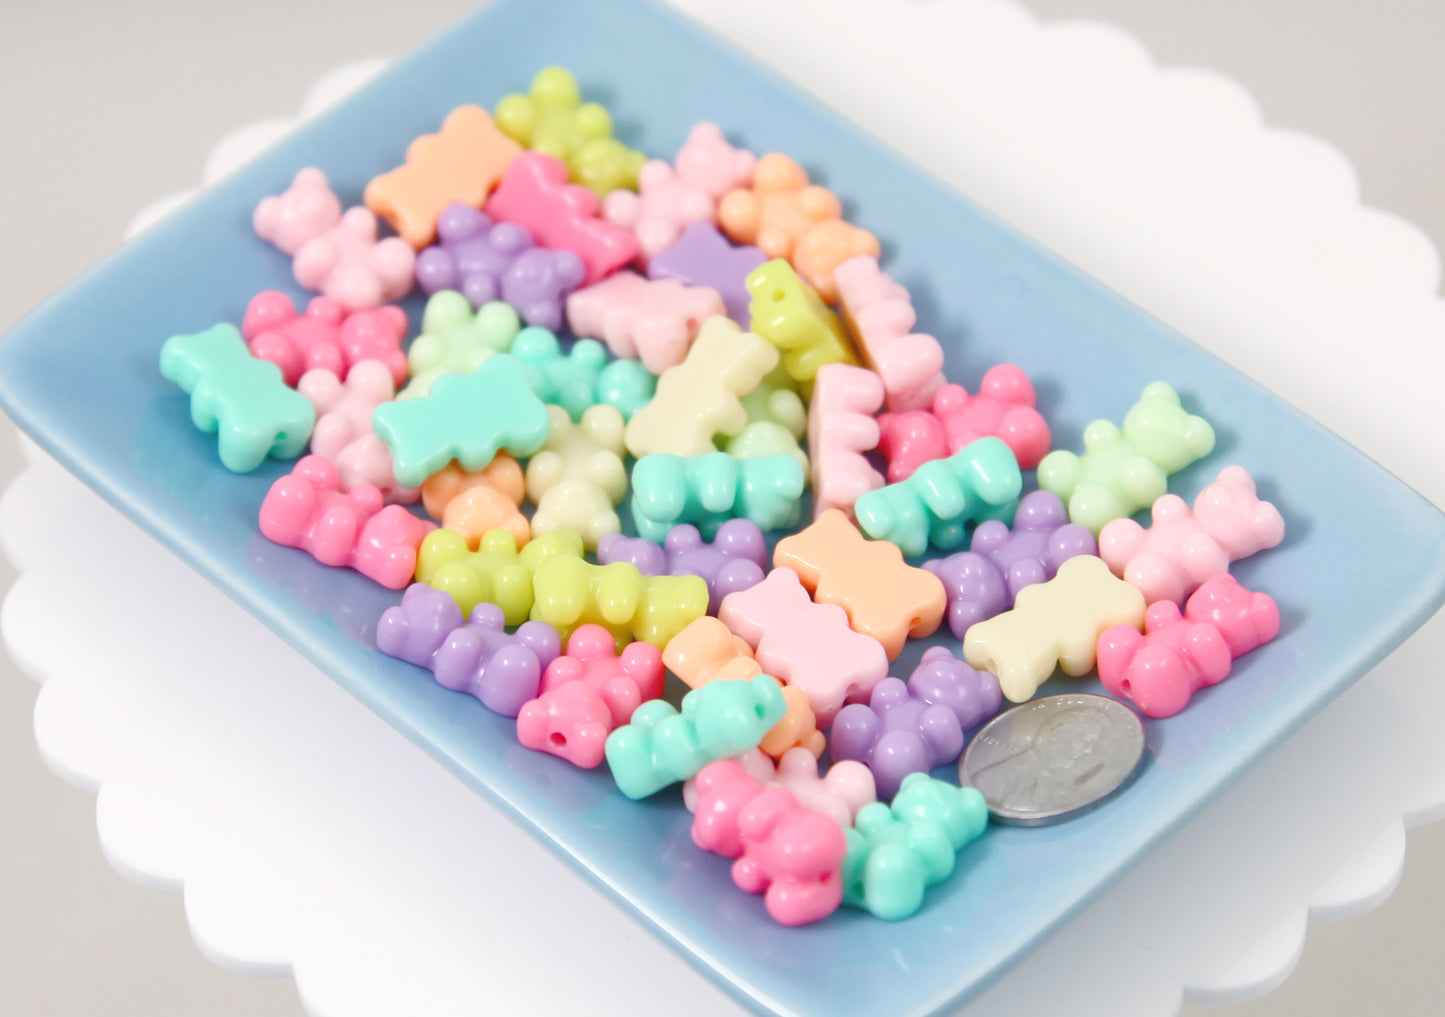 Pastel Gummy Bear Beads - 18mm Pastel Opaque Fake Gummy Bears with Hole for Stringing - Fake Candy Resin Beads - 30 pc set